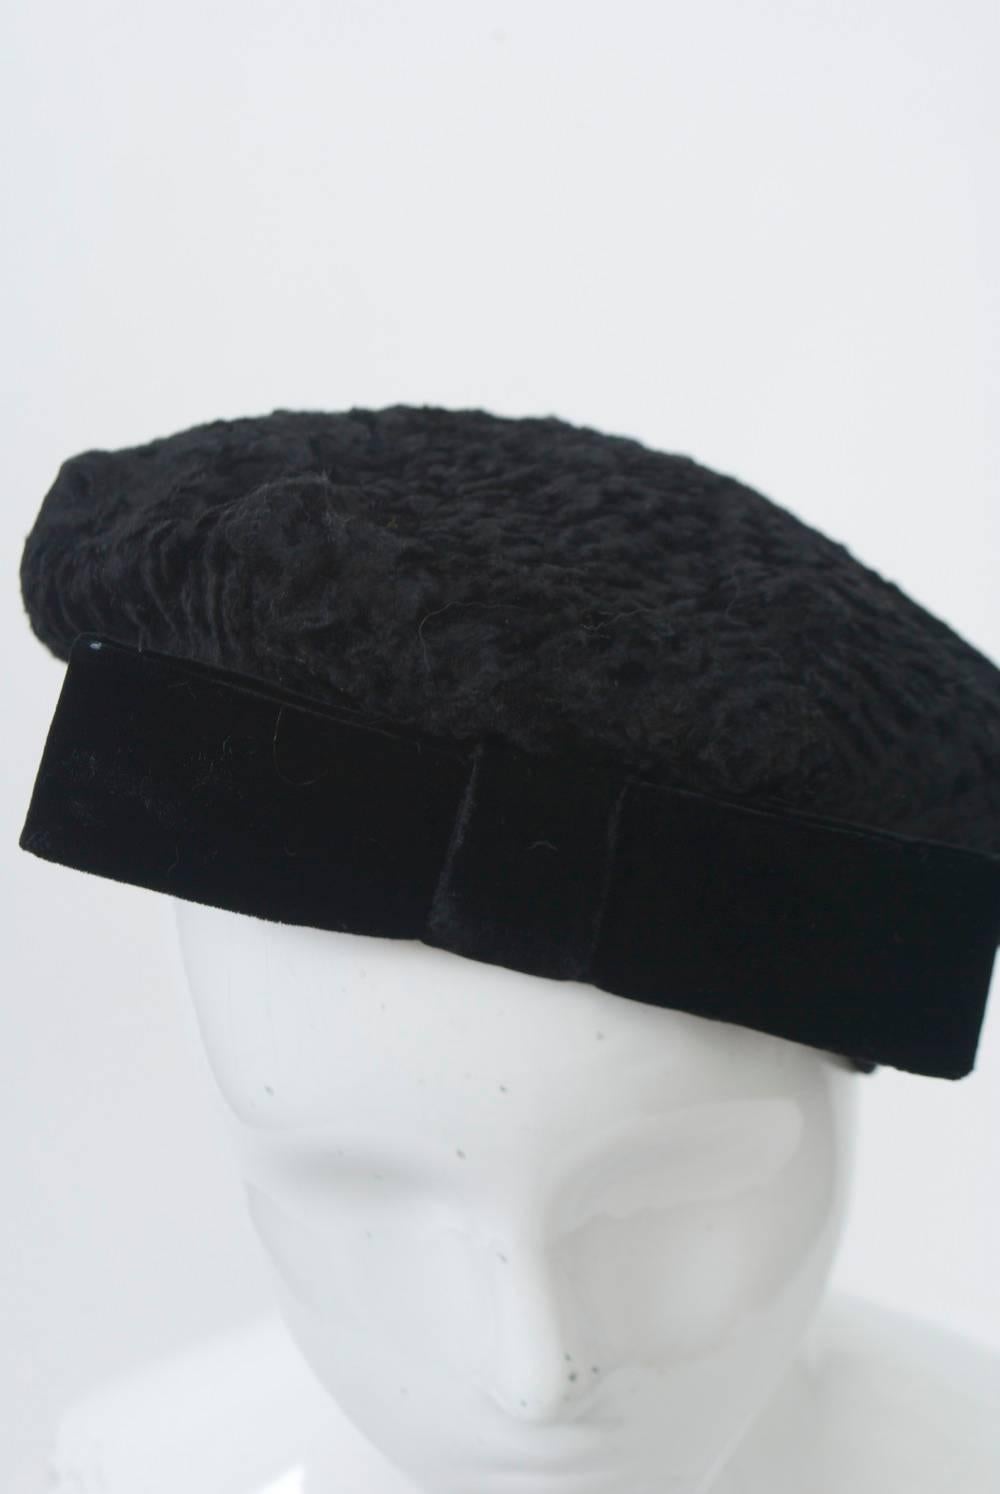 Black broadtail beret trimmed with velvet band and bow. Retailed by Bonwit Teller.